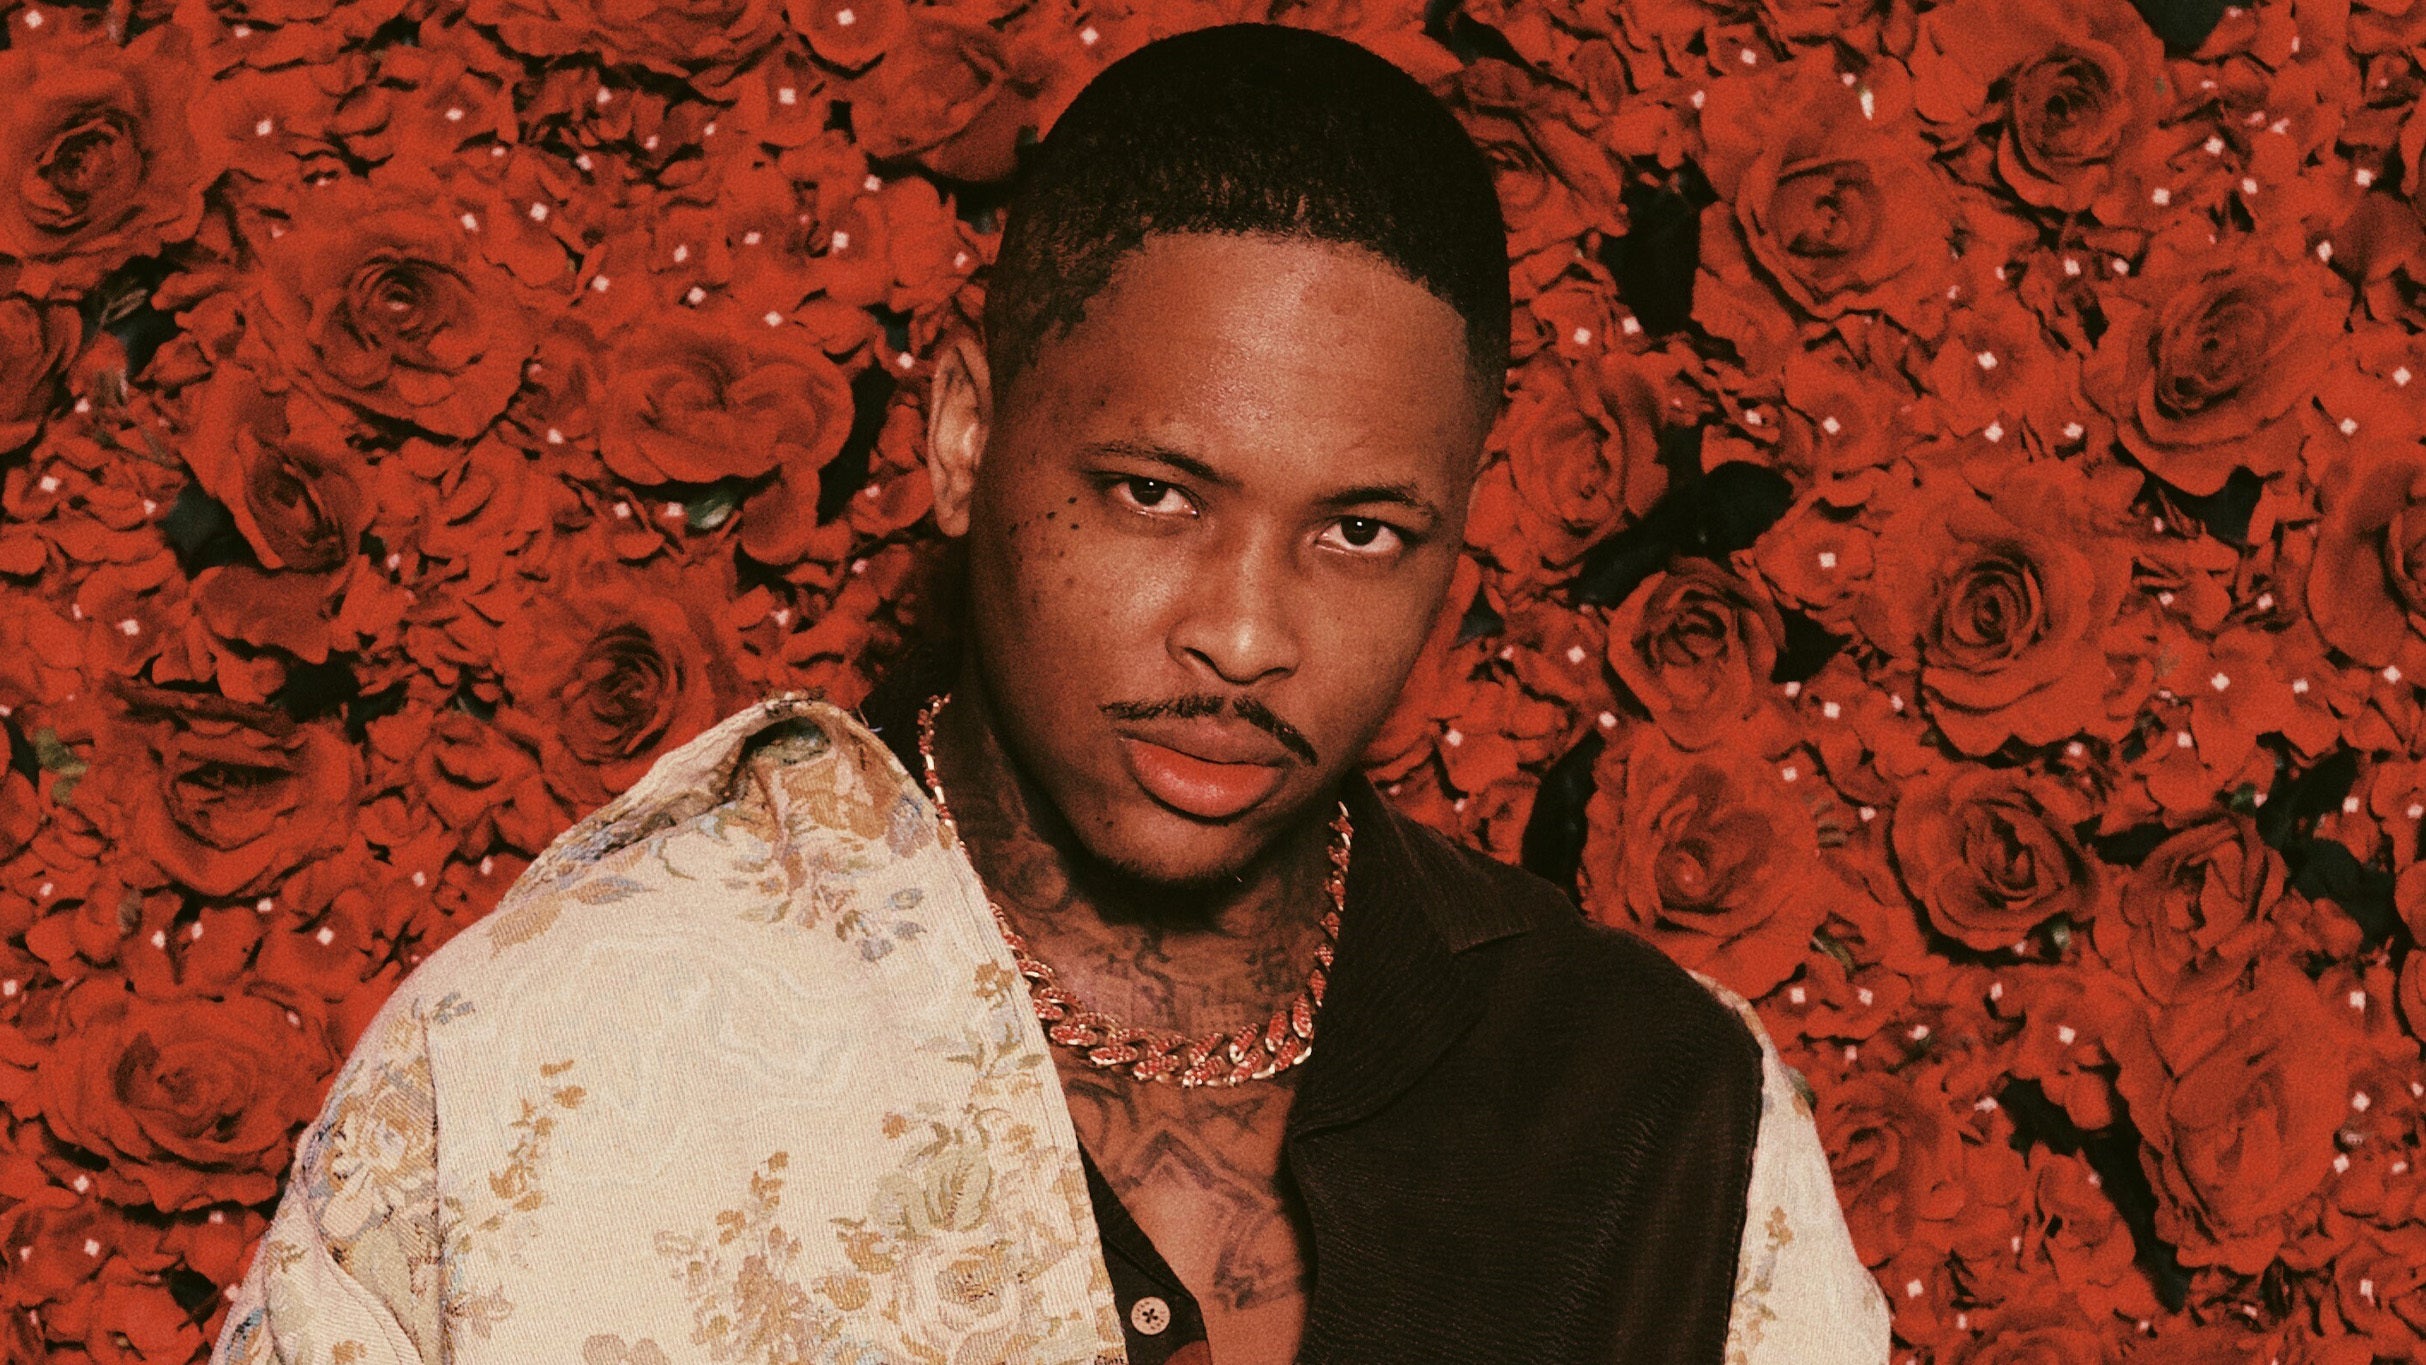 members only presale passcode for YG - The JUST RE'D UP Tour face value tickets in New York